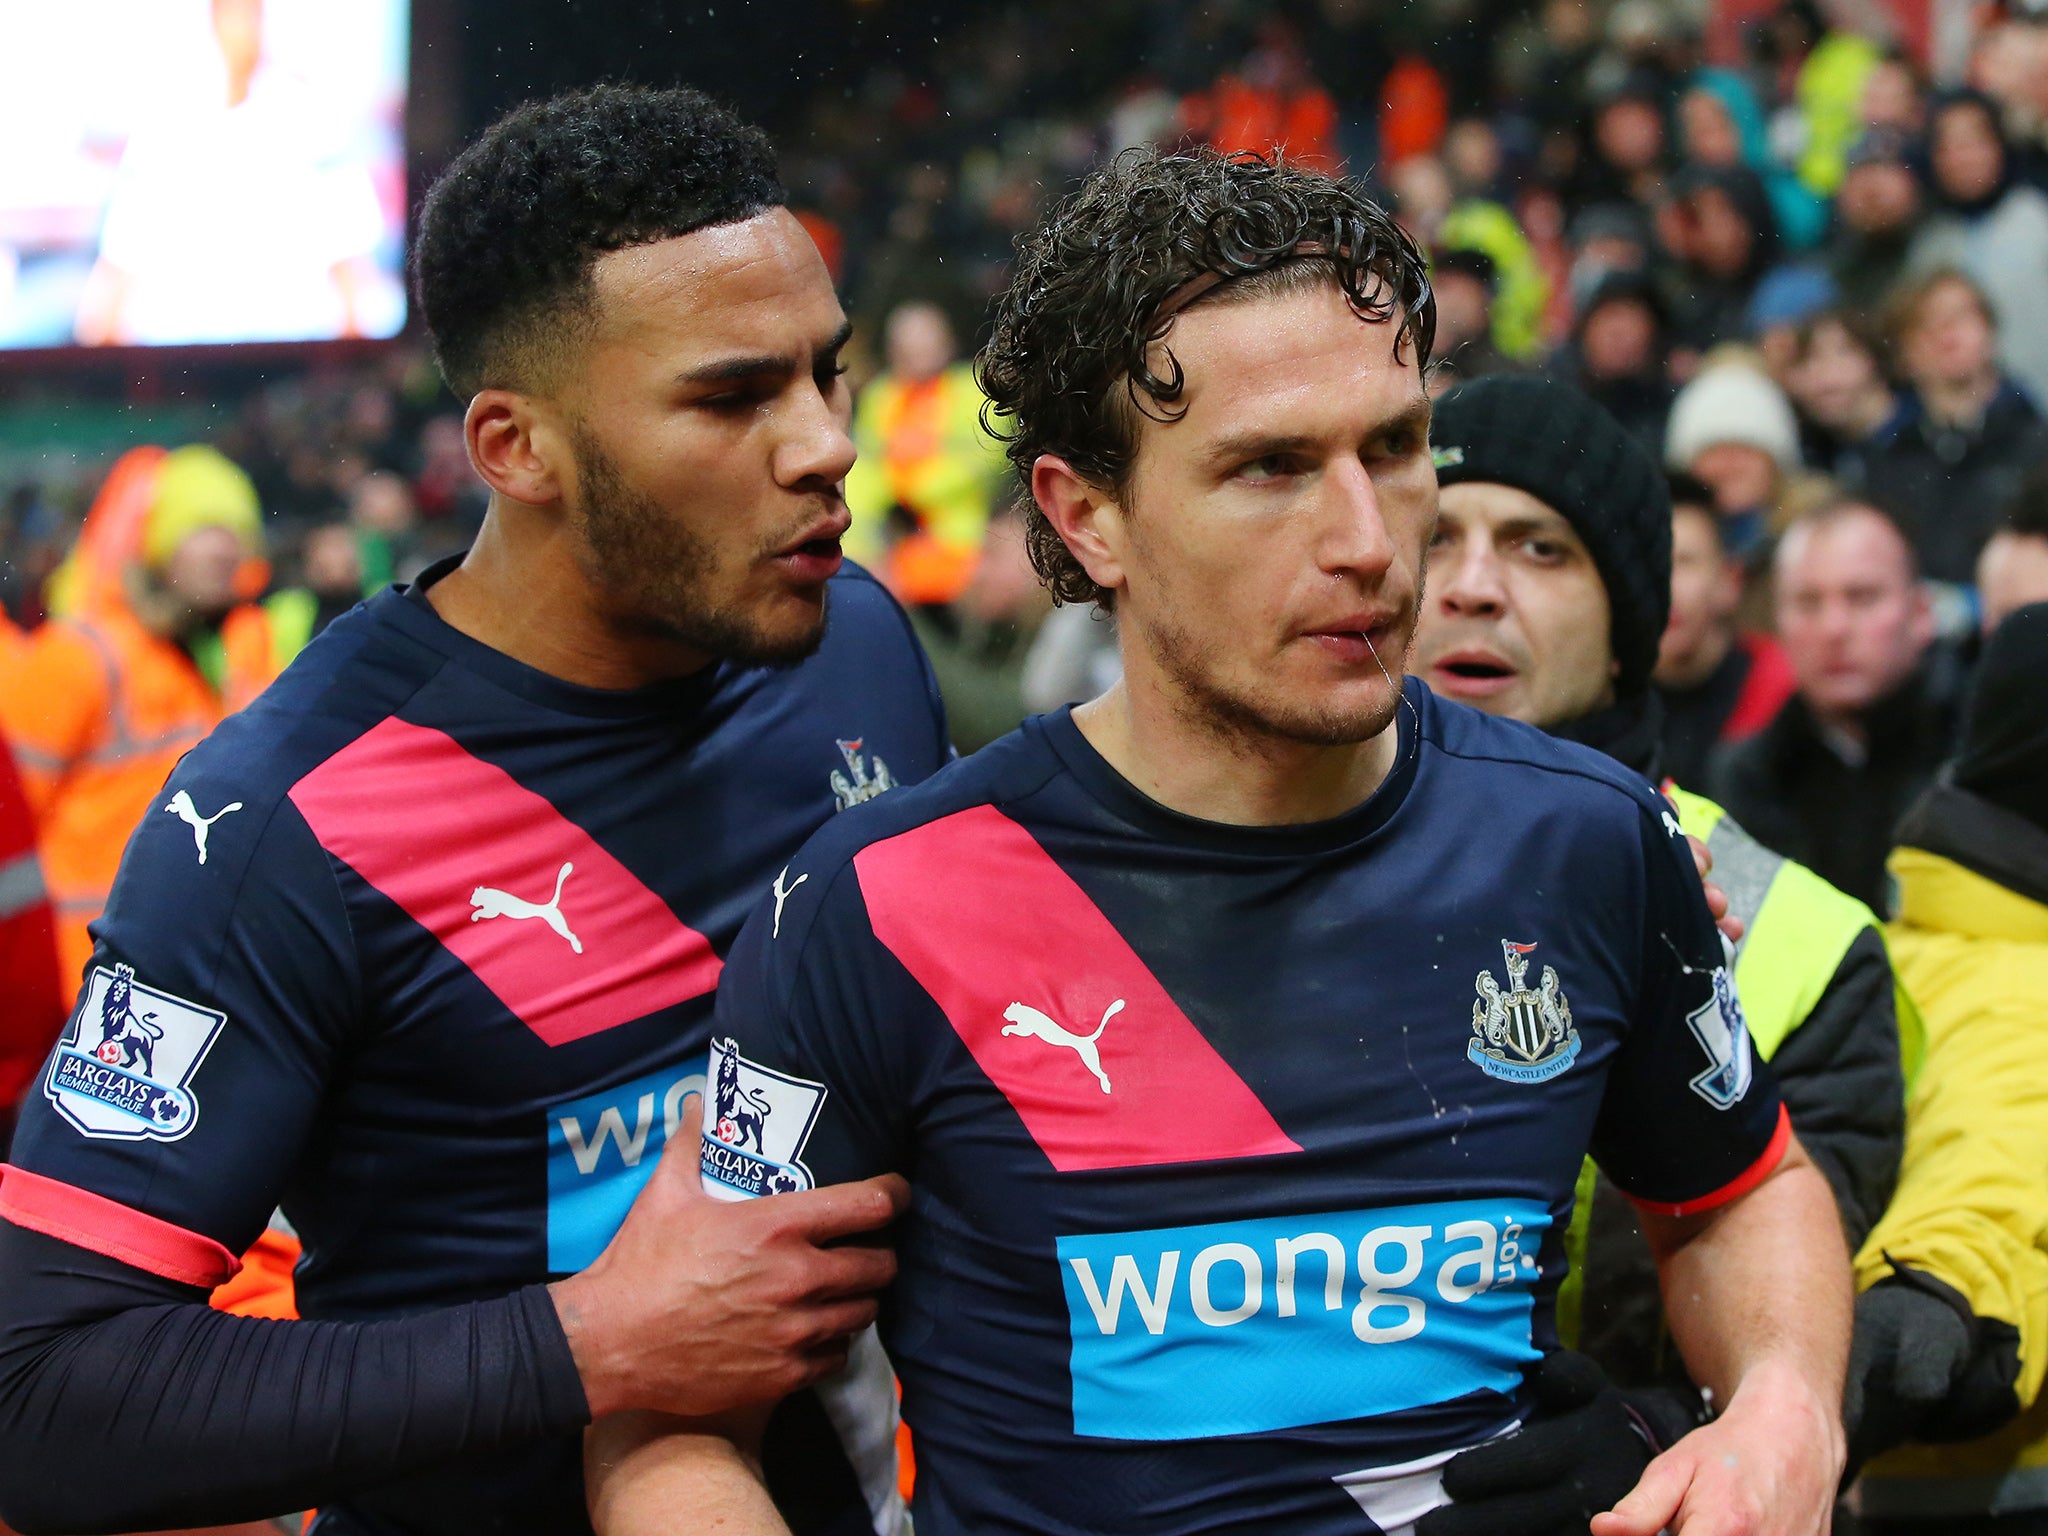 Janmaat, right, confronting supporters following the recent defeat at Stoke City